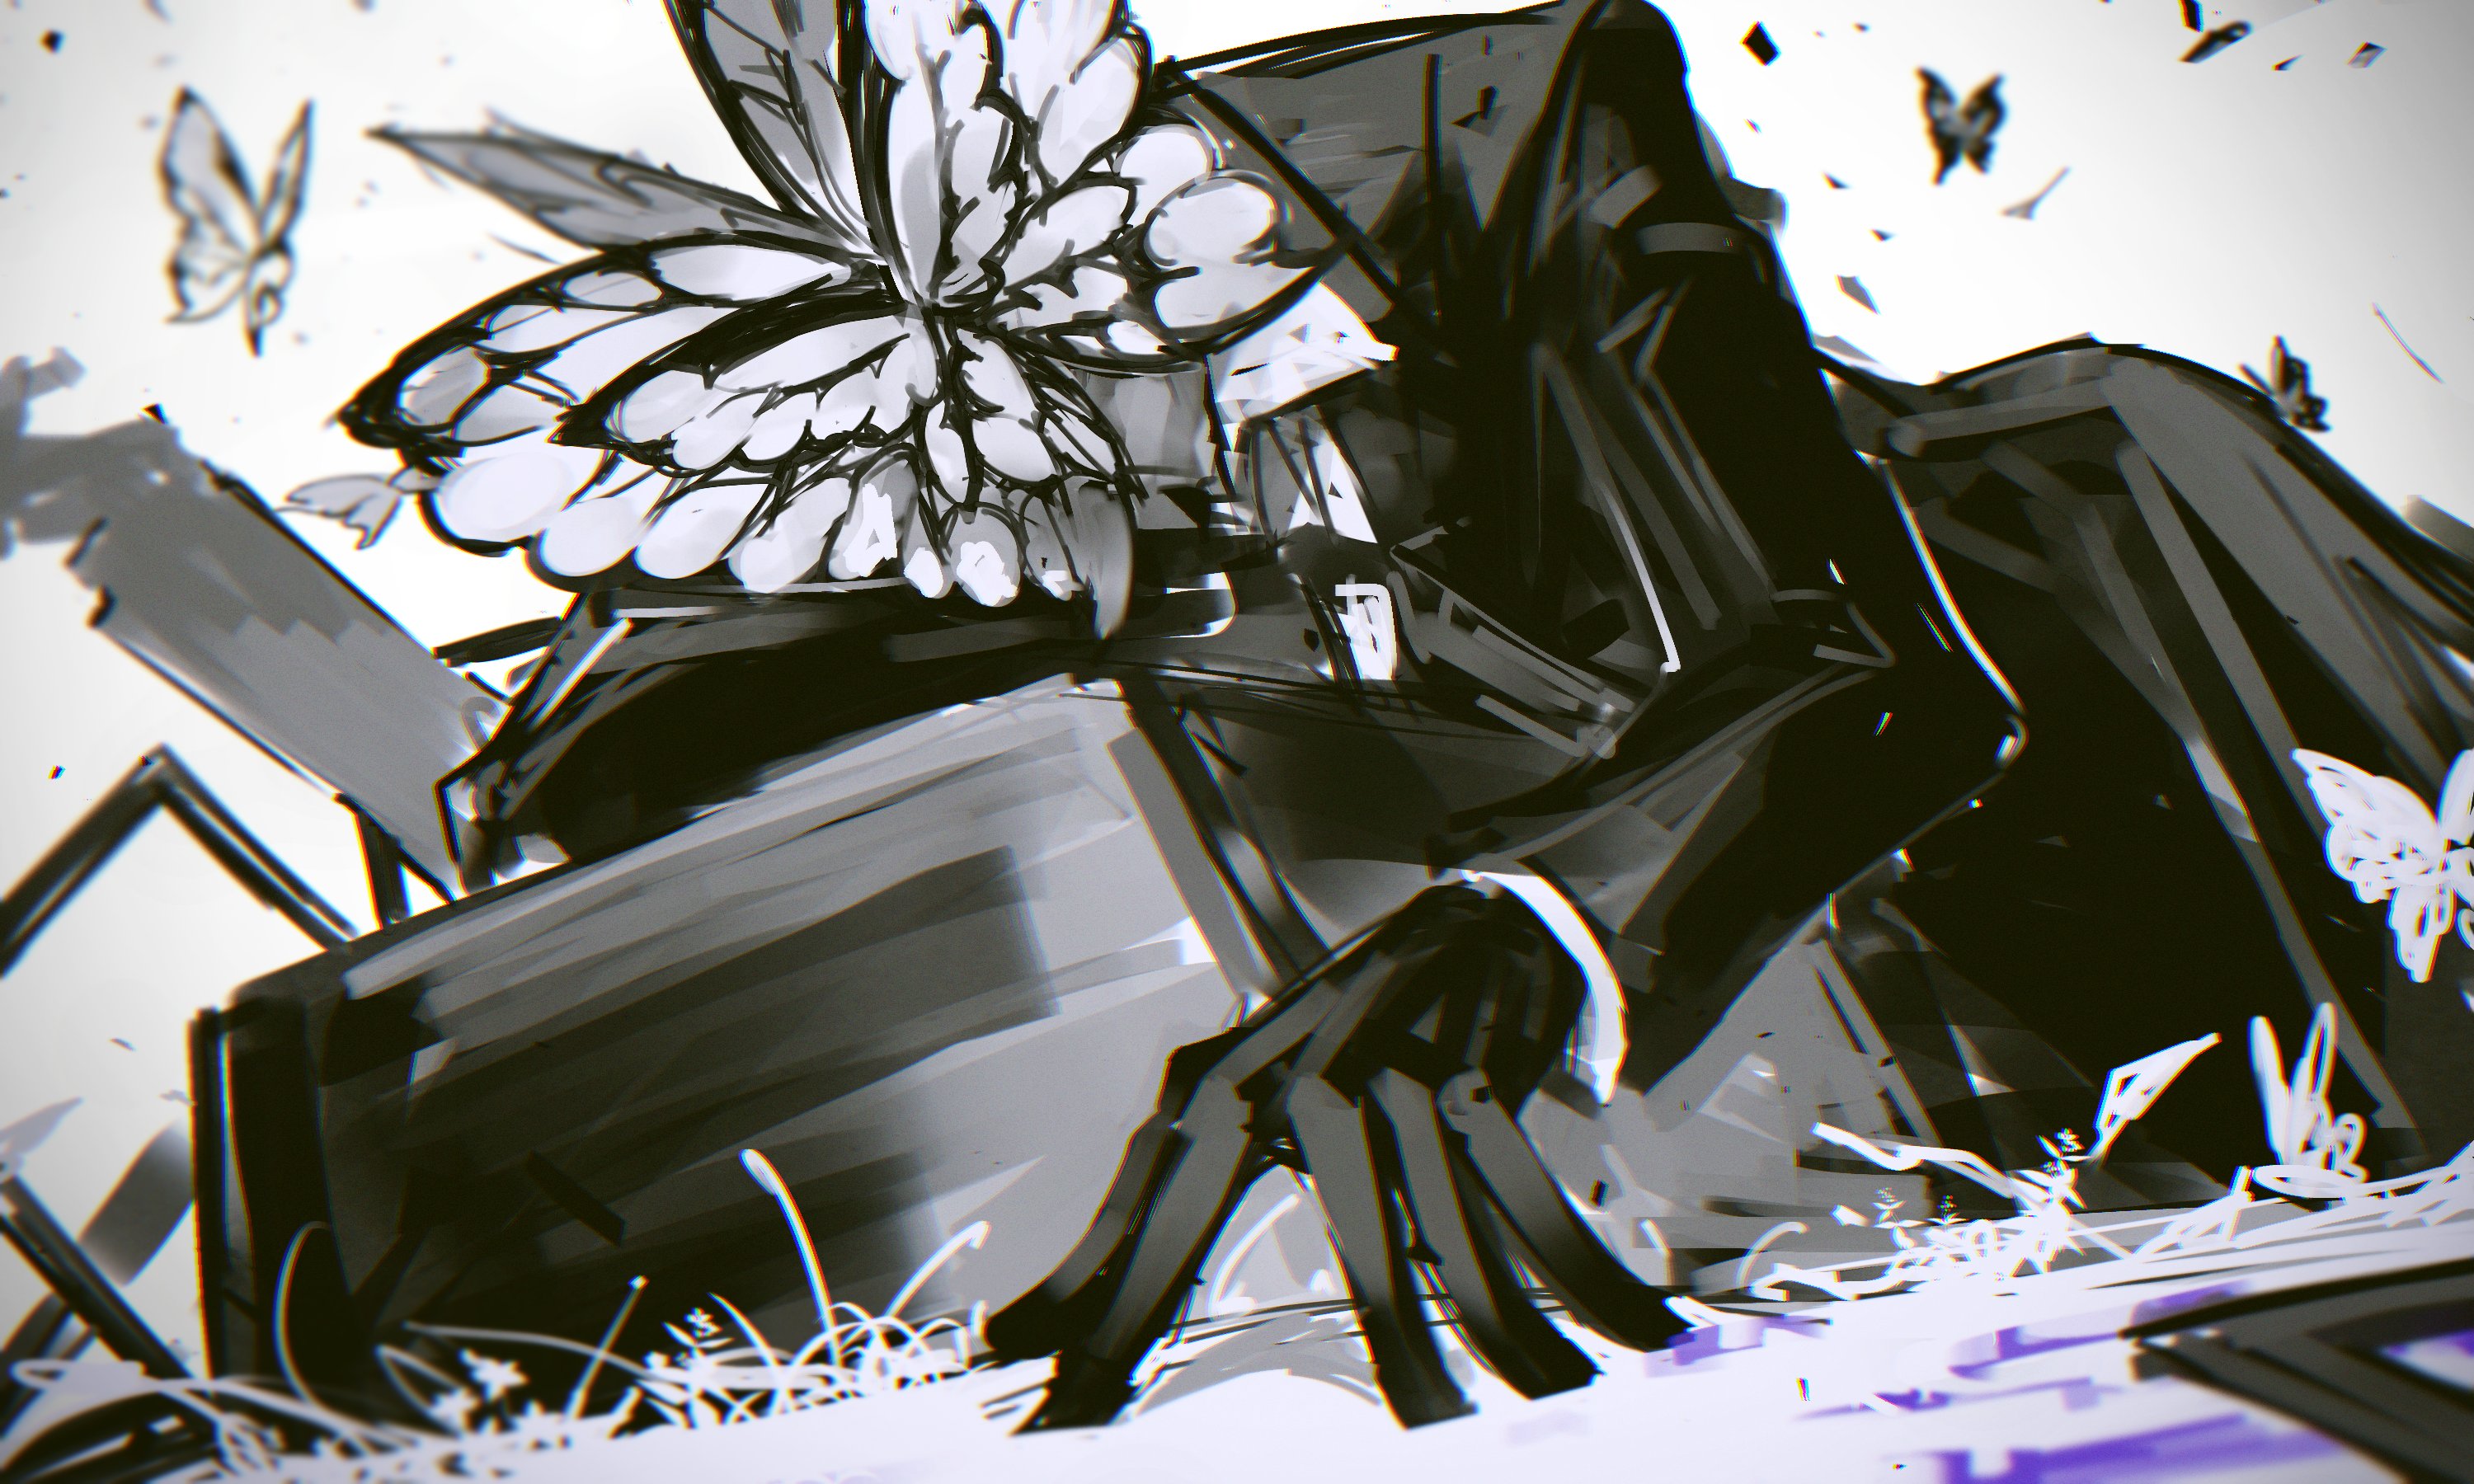 Remsrar Funeral Of The Dead Butterflies Lobotomy Corporation Project